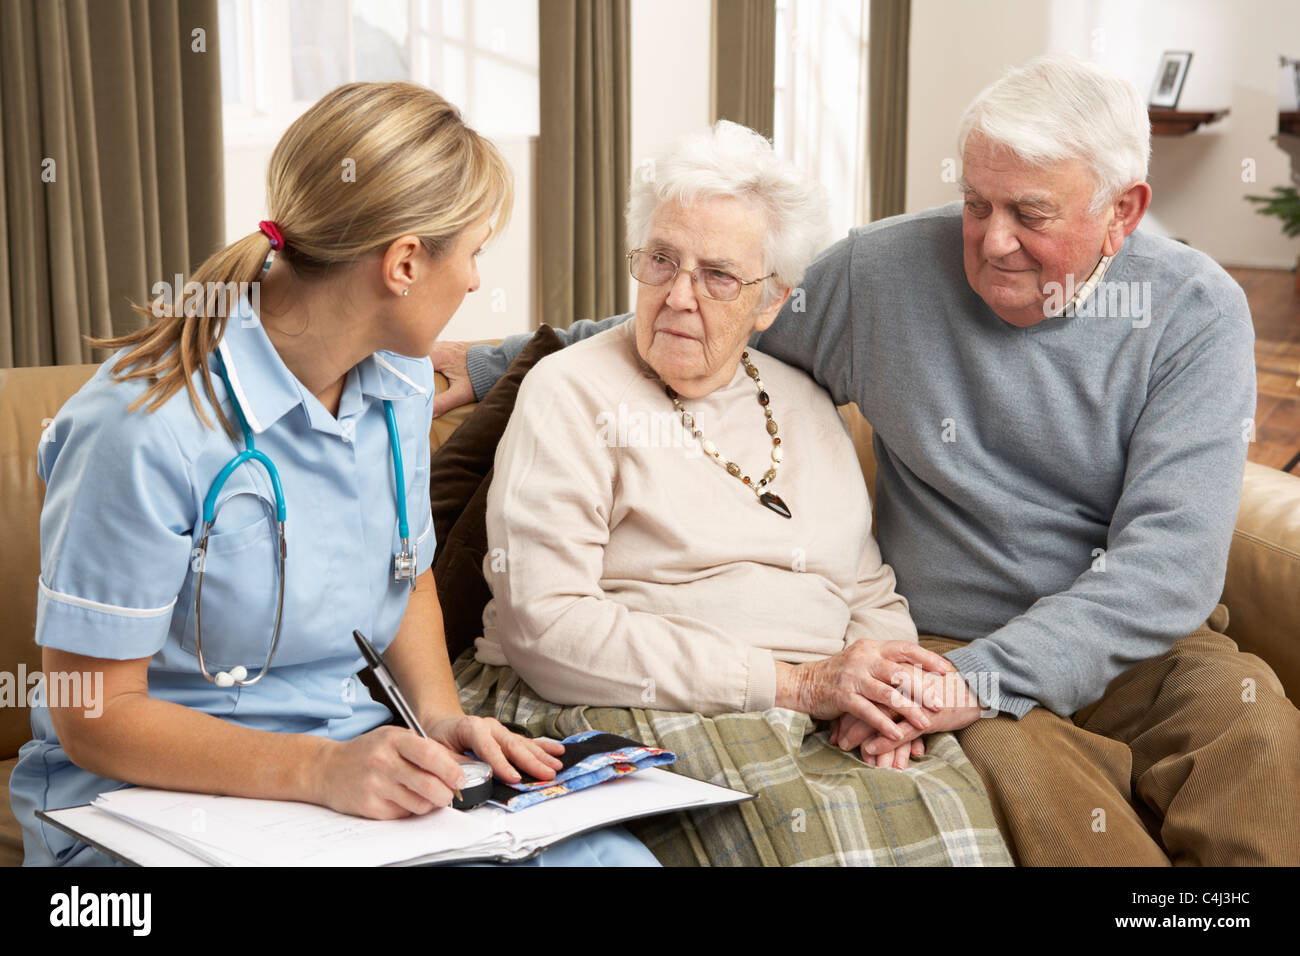 Senior Couple In Discussion With Health Visitor At Home Stock Photo